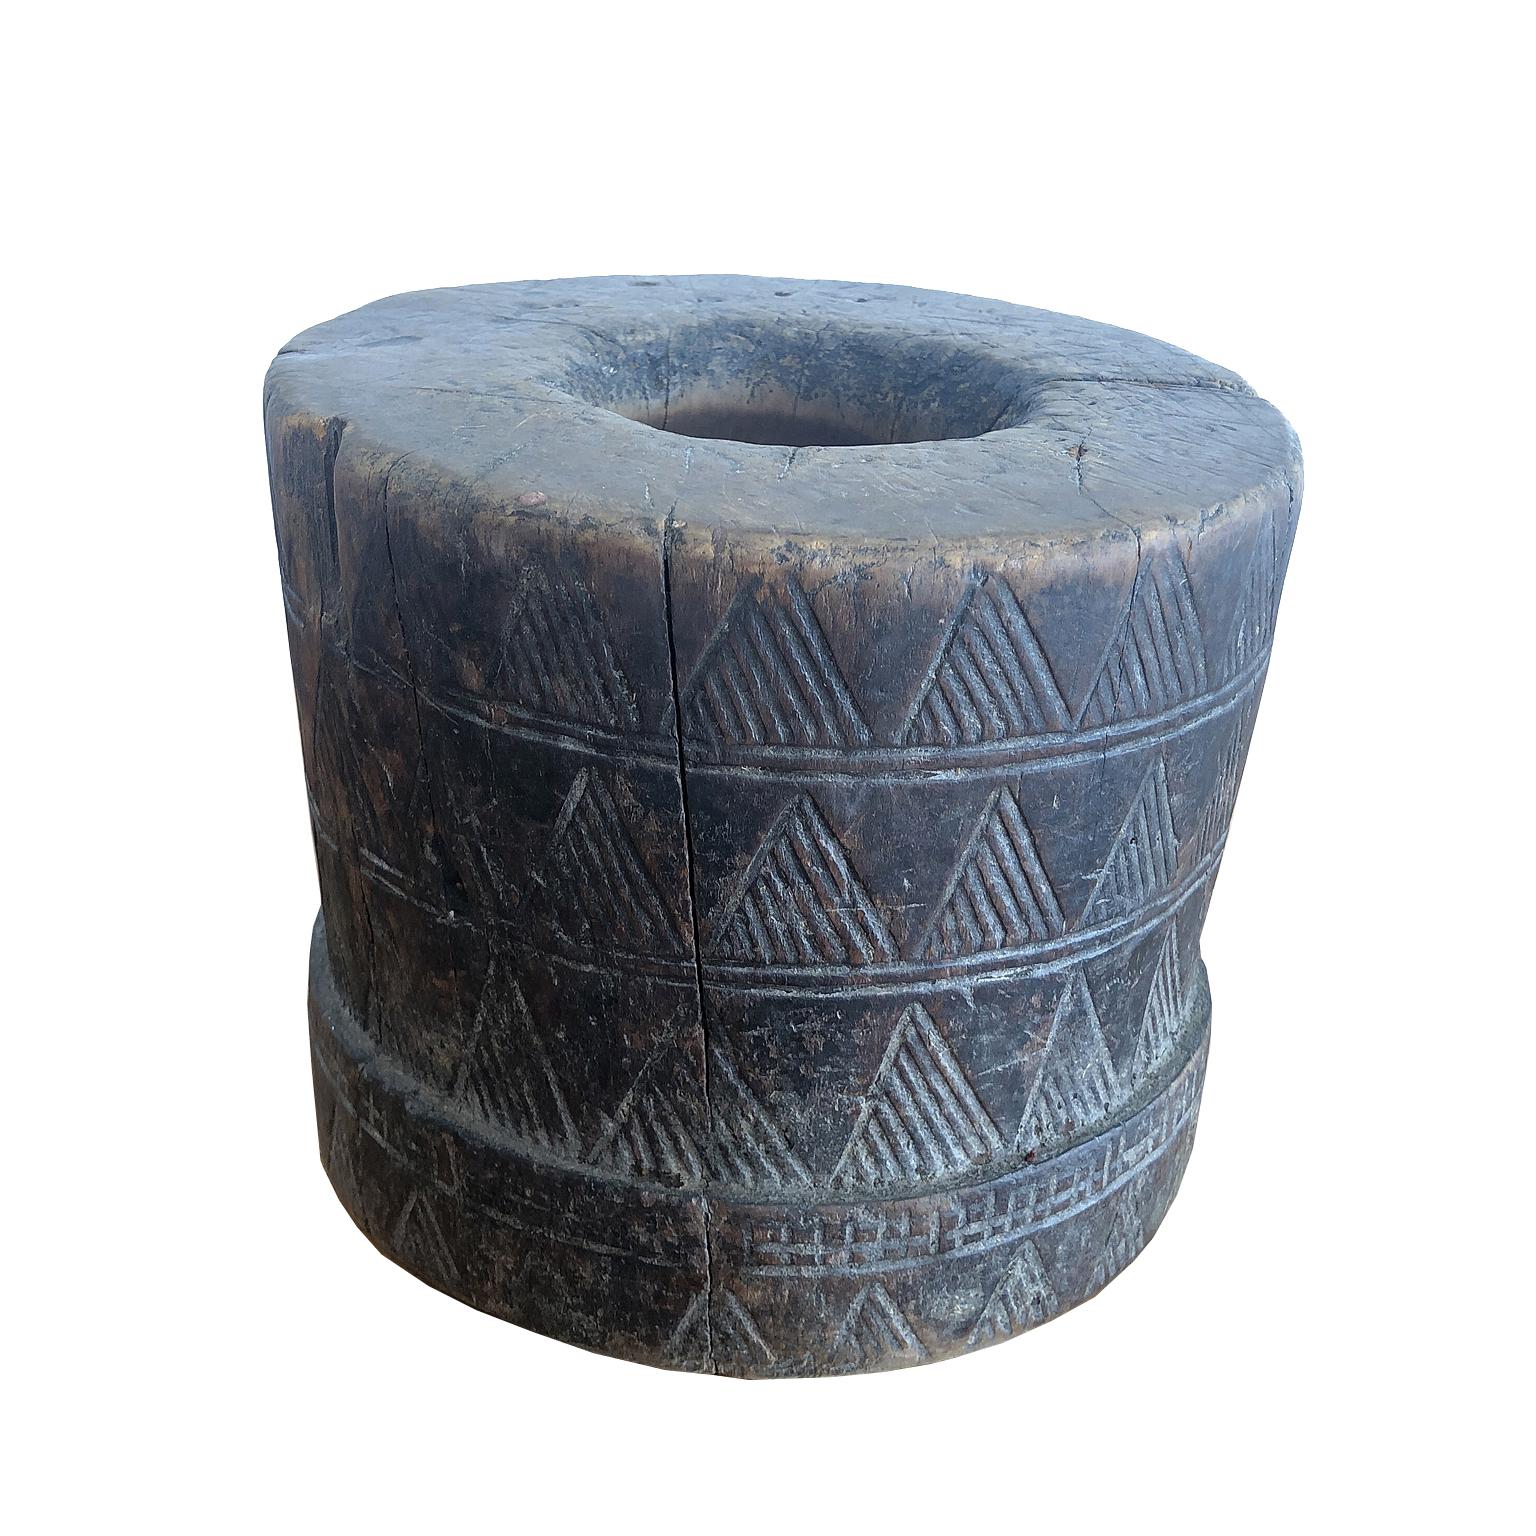 This fine African mortar was made and used by the Kaffa people in Ethiopia to grind coffee beans. Carved out of a solid block of wood and decorated with incised geometric carvings, it served as a utilitarian object in everyday tribal life and was